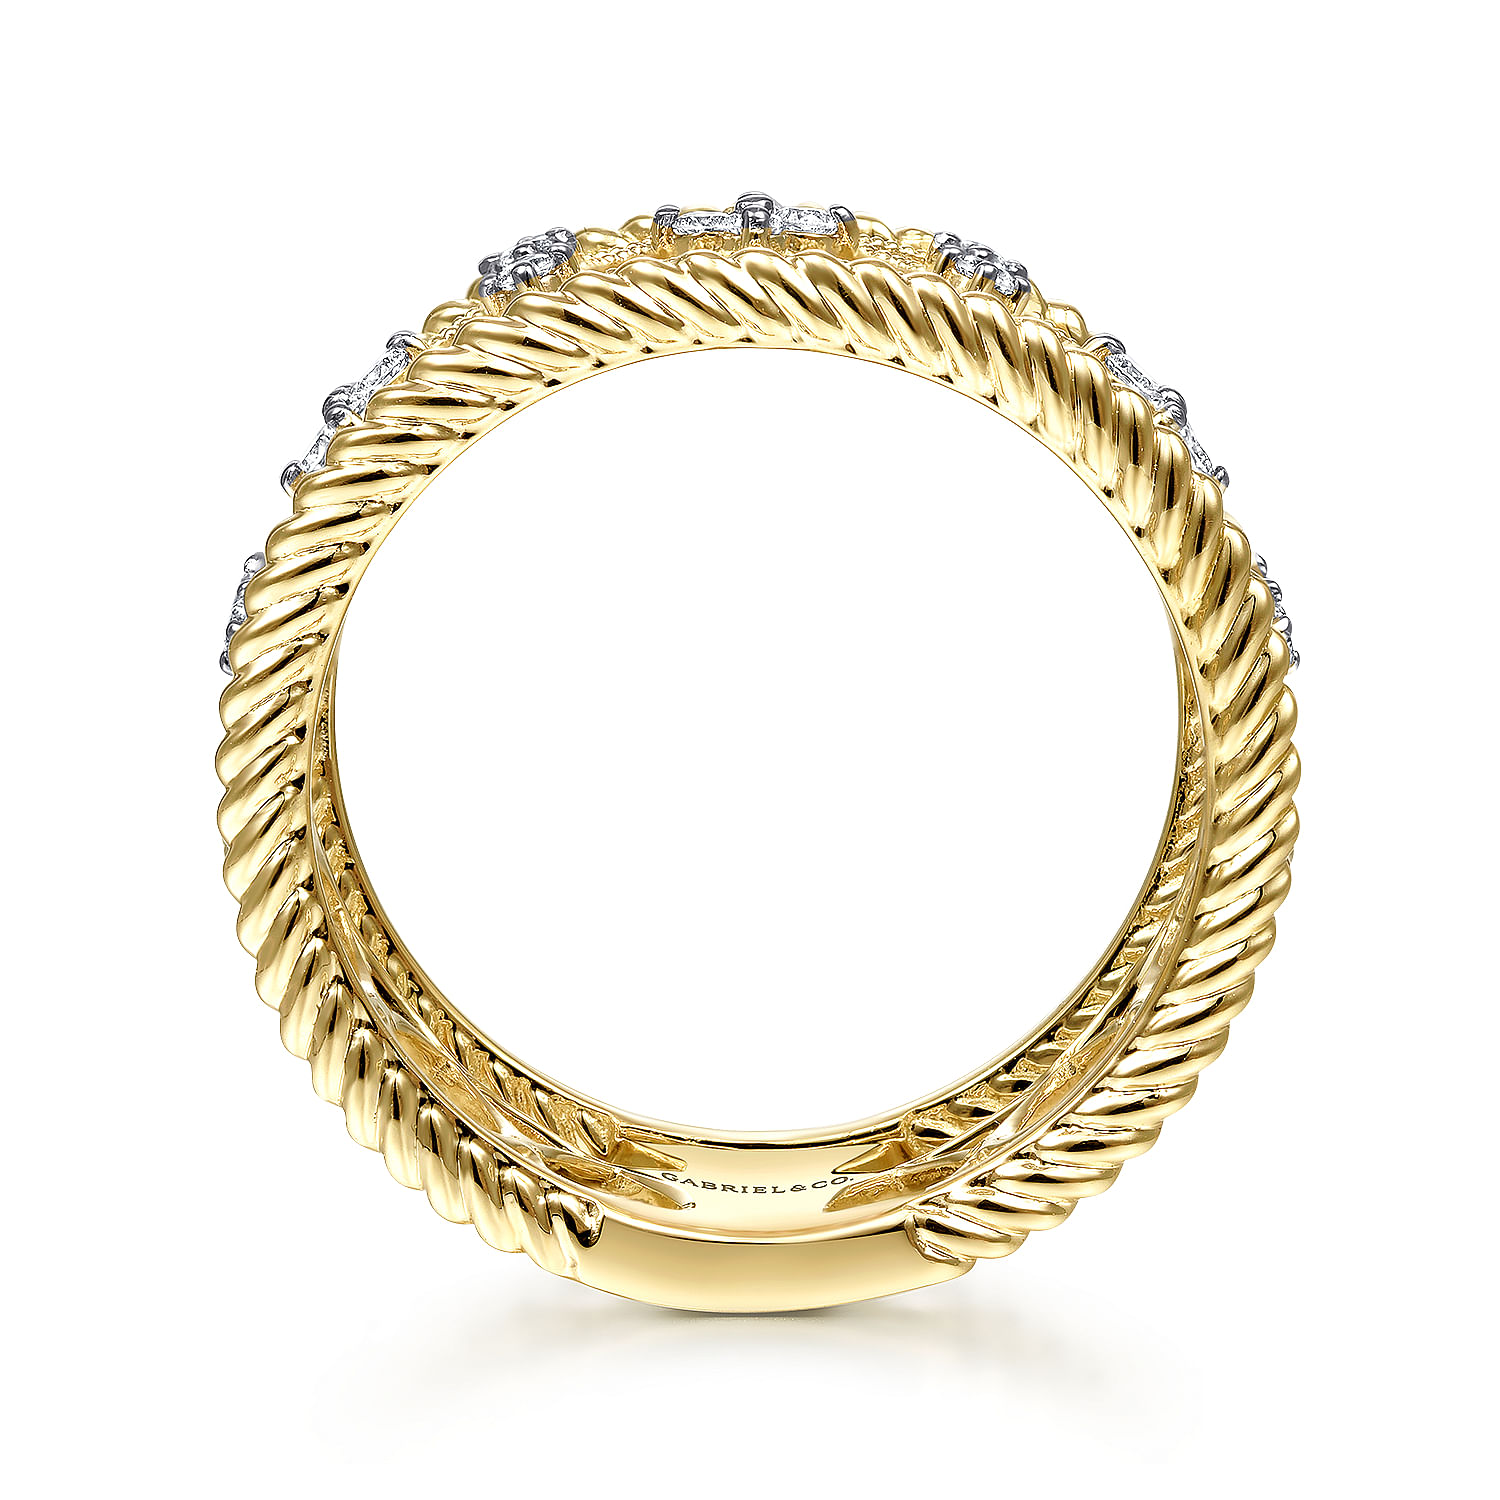 14K Yellow Gold Wide Open Work Diamond Ring with Twisted Rope Edge